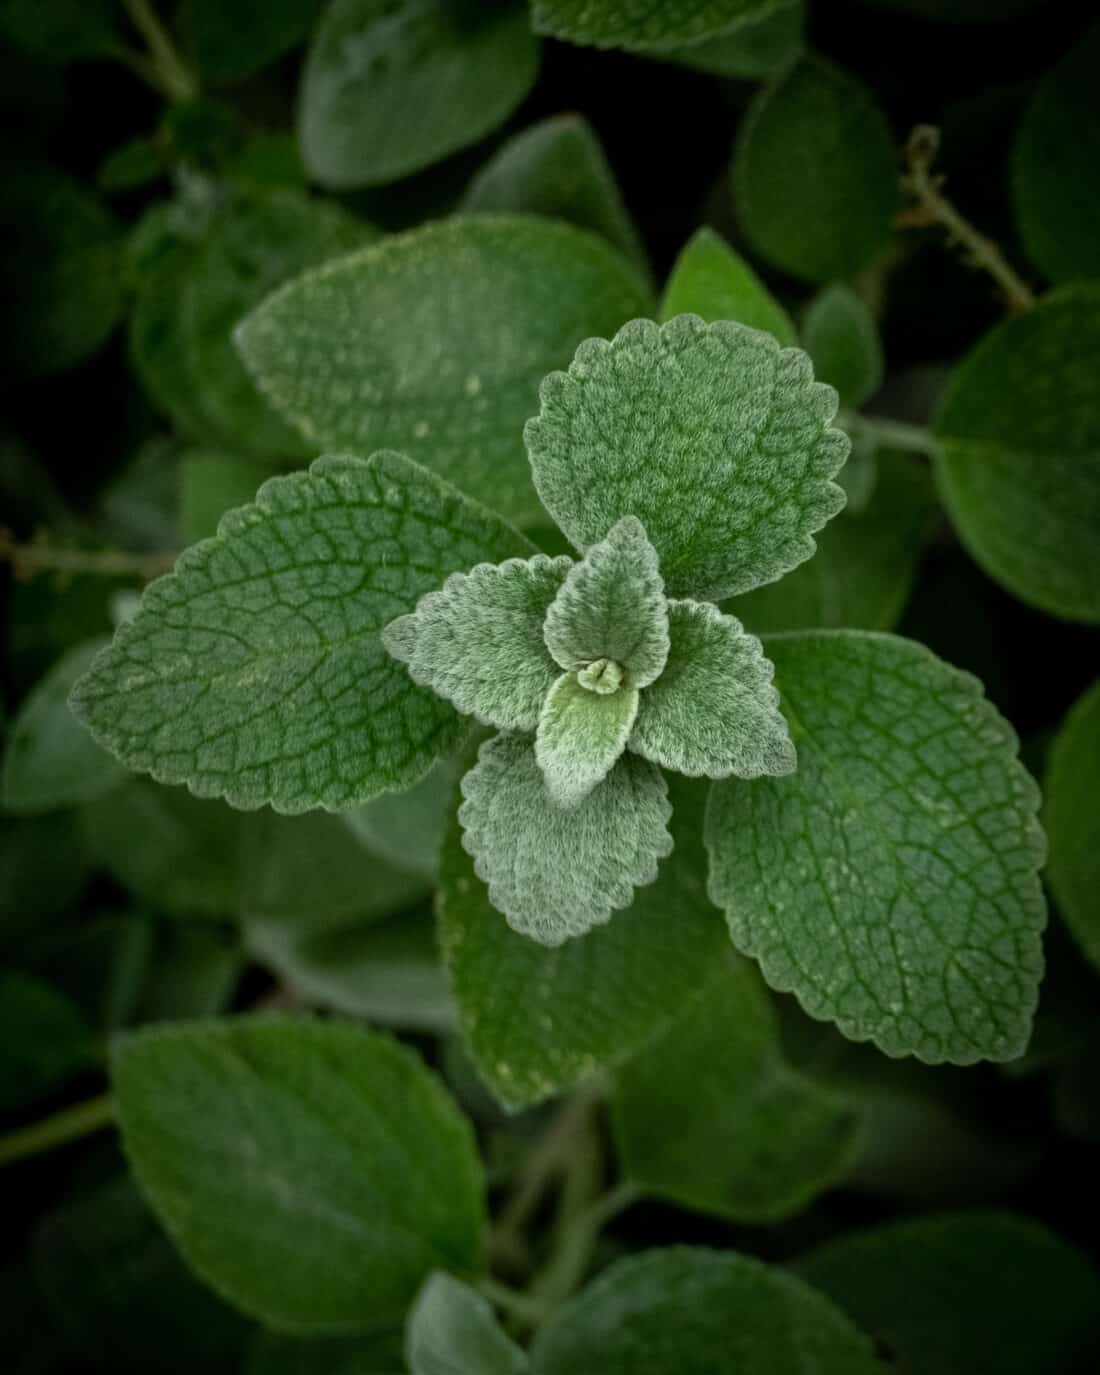 A close up of a plant with green leaves. Plectranthus argentatus